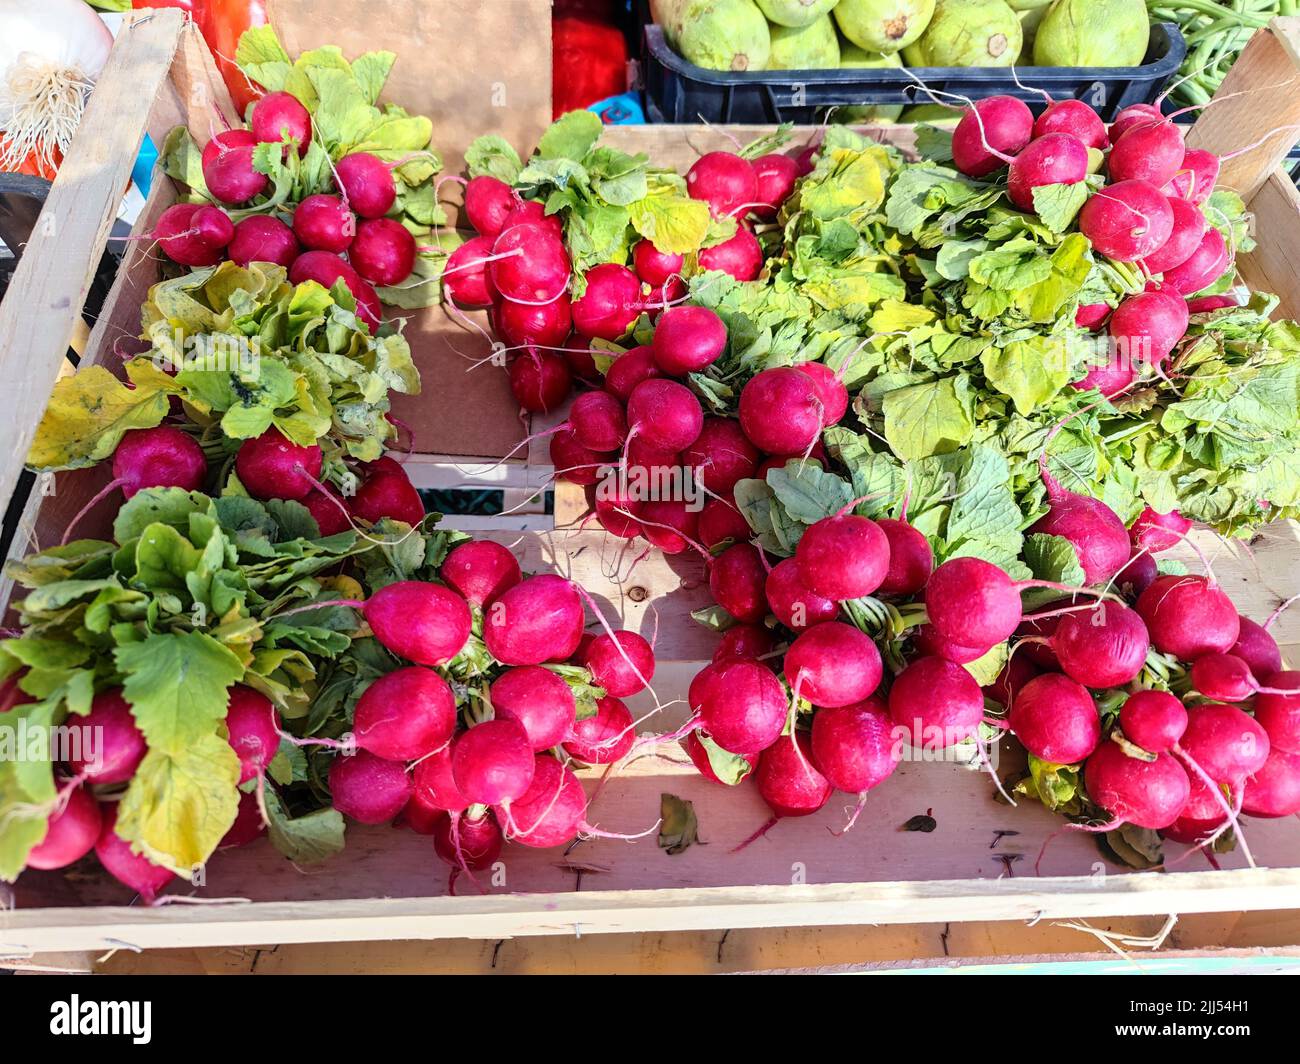 Delicious fresh radish sold in a market stall on a street market Stock Photo